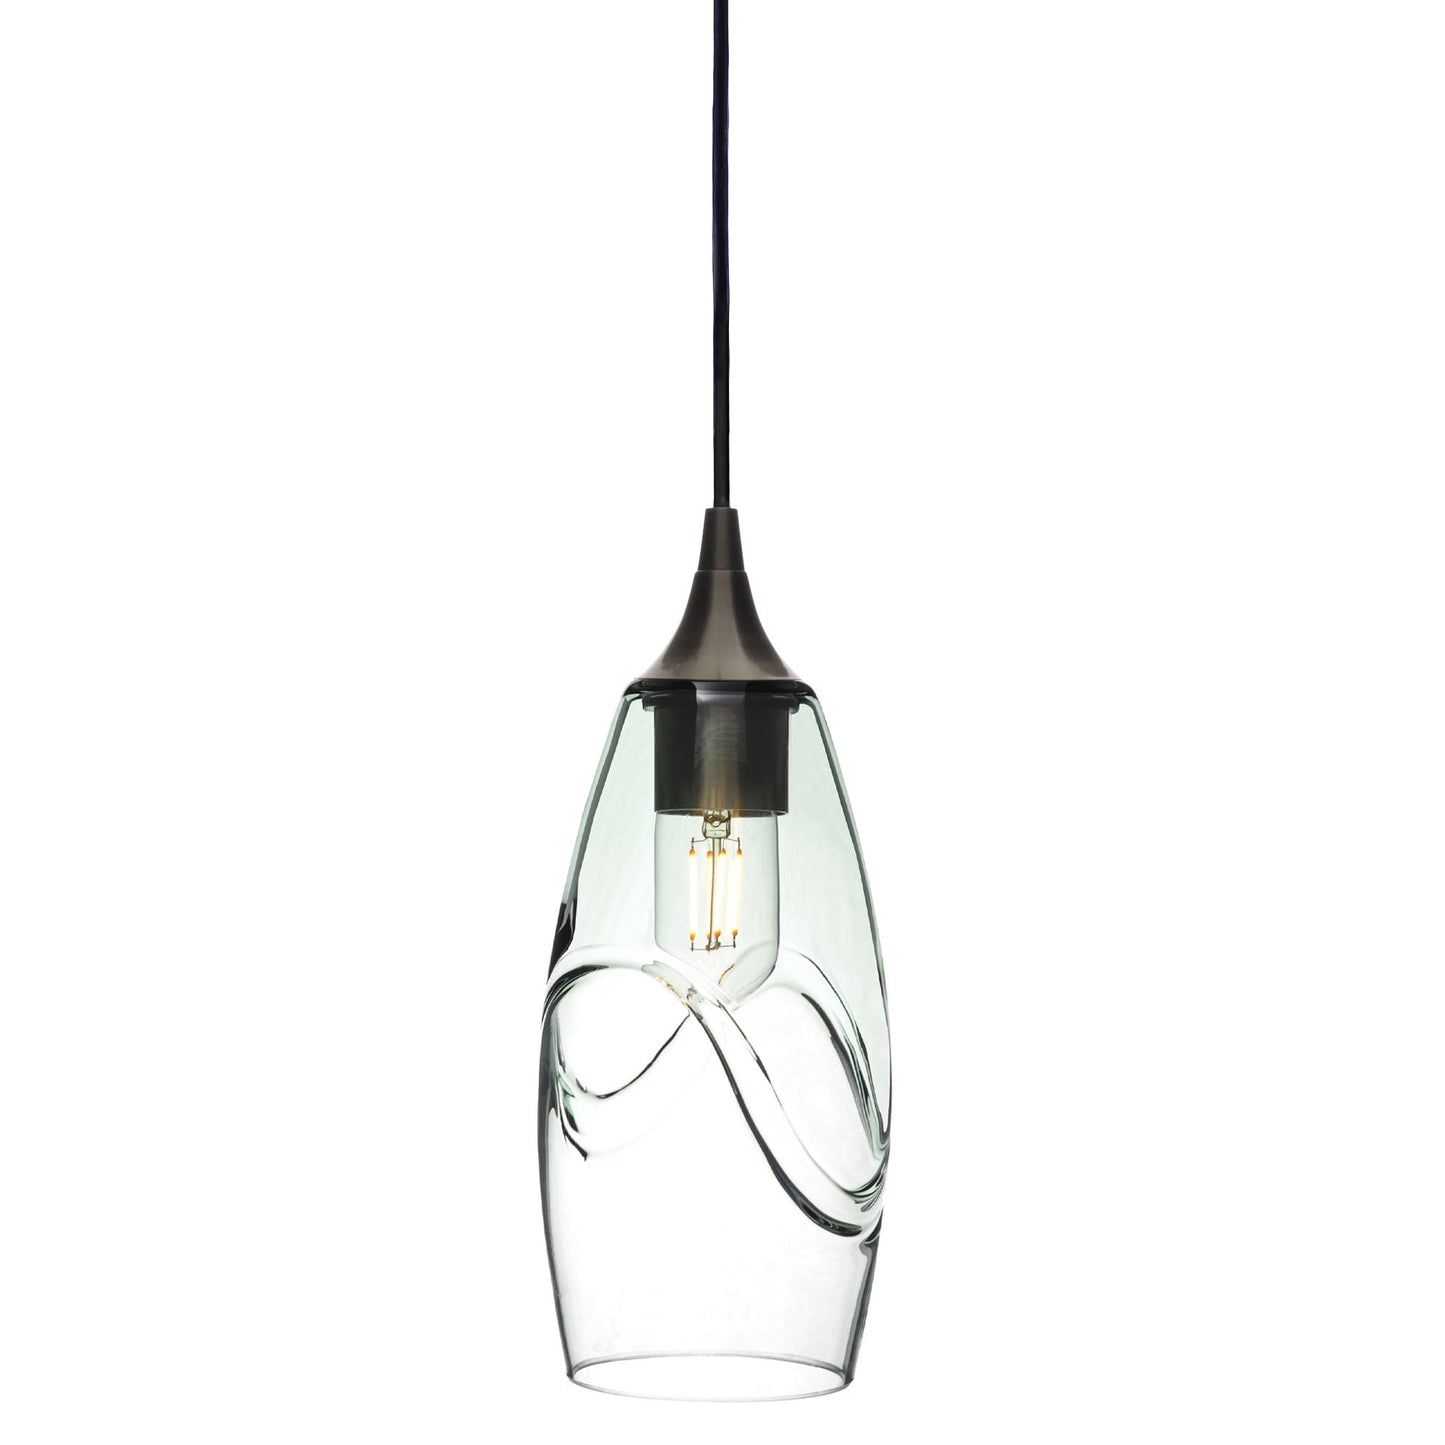 147 Swell: Single Pendant Light-Glass-Bicycle Glass Co - Hotshop-Eco Clear-Antique Bronze-Bicycle Glass Co